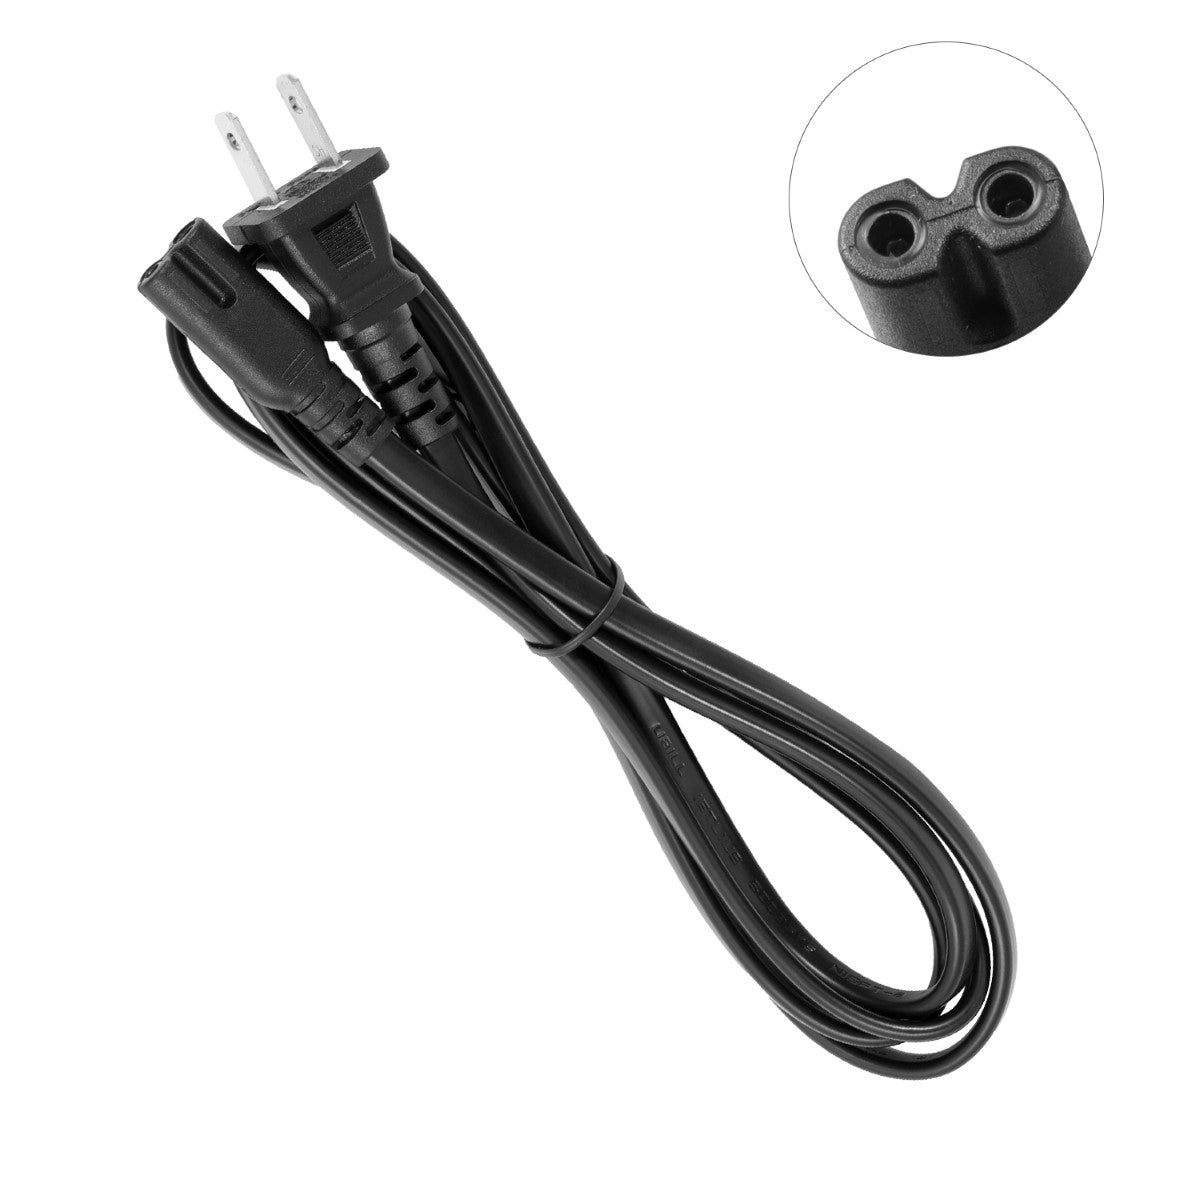 Power Cord for HP ENVY 4500 e-All-in-One Printer.